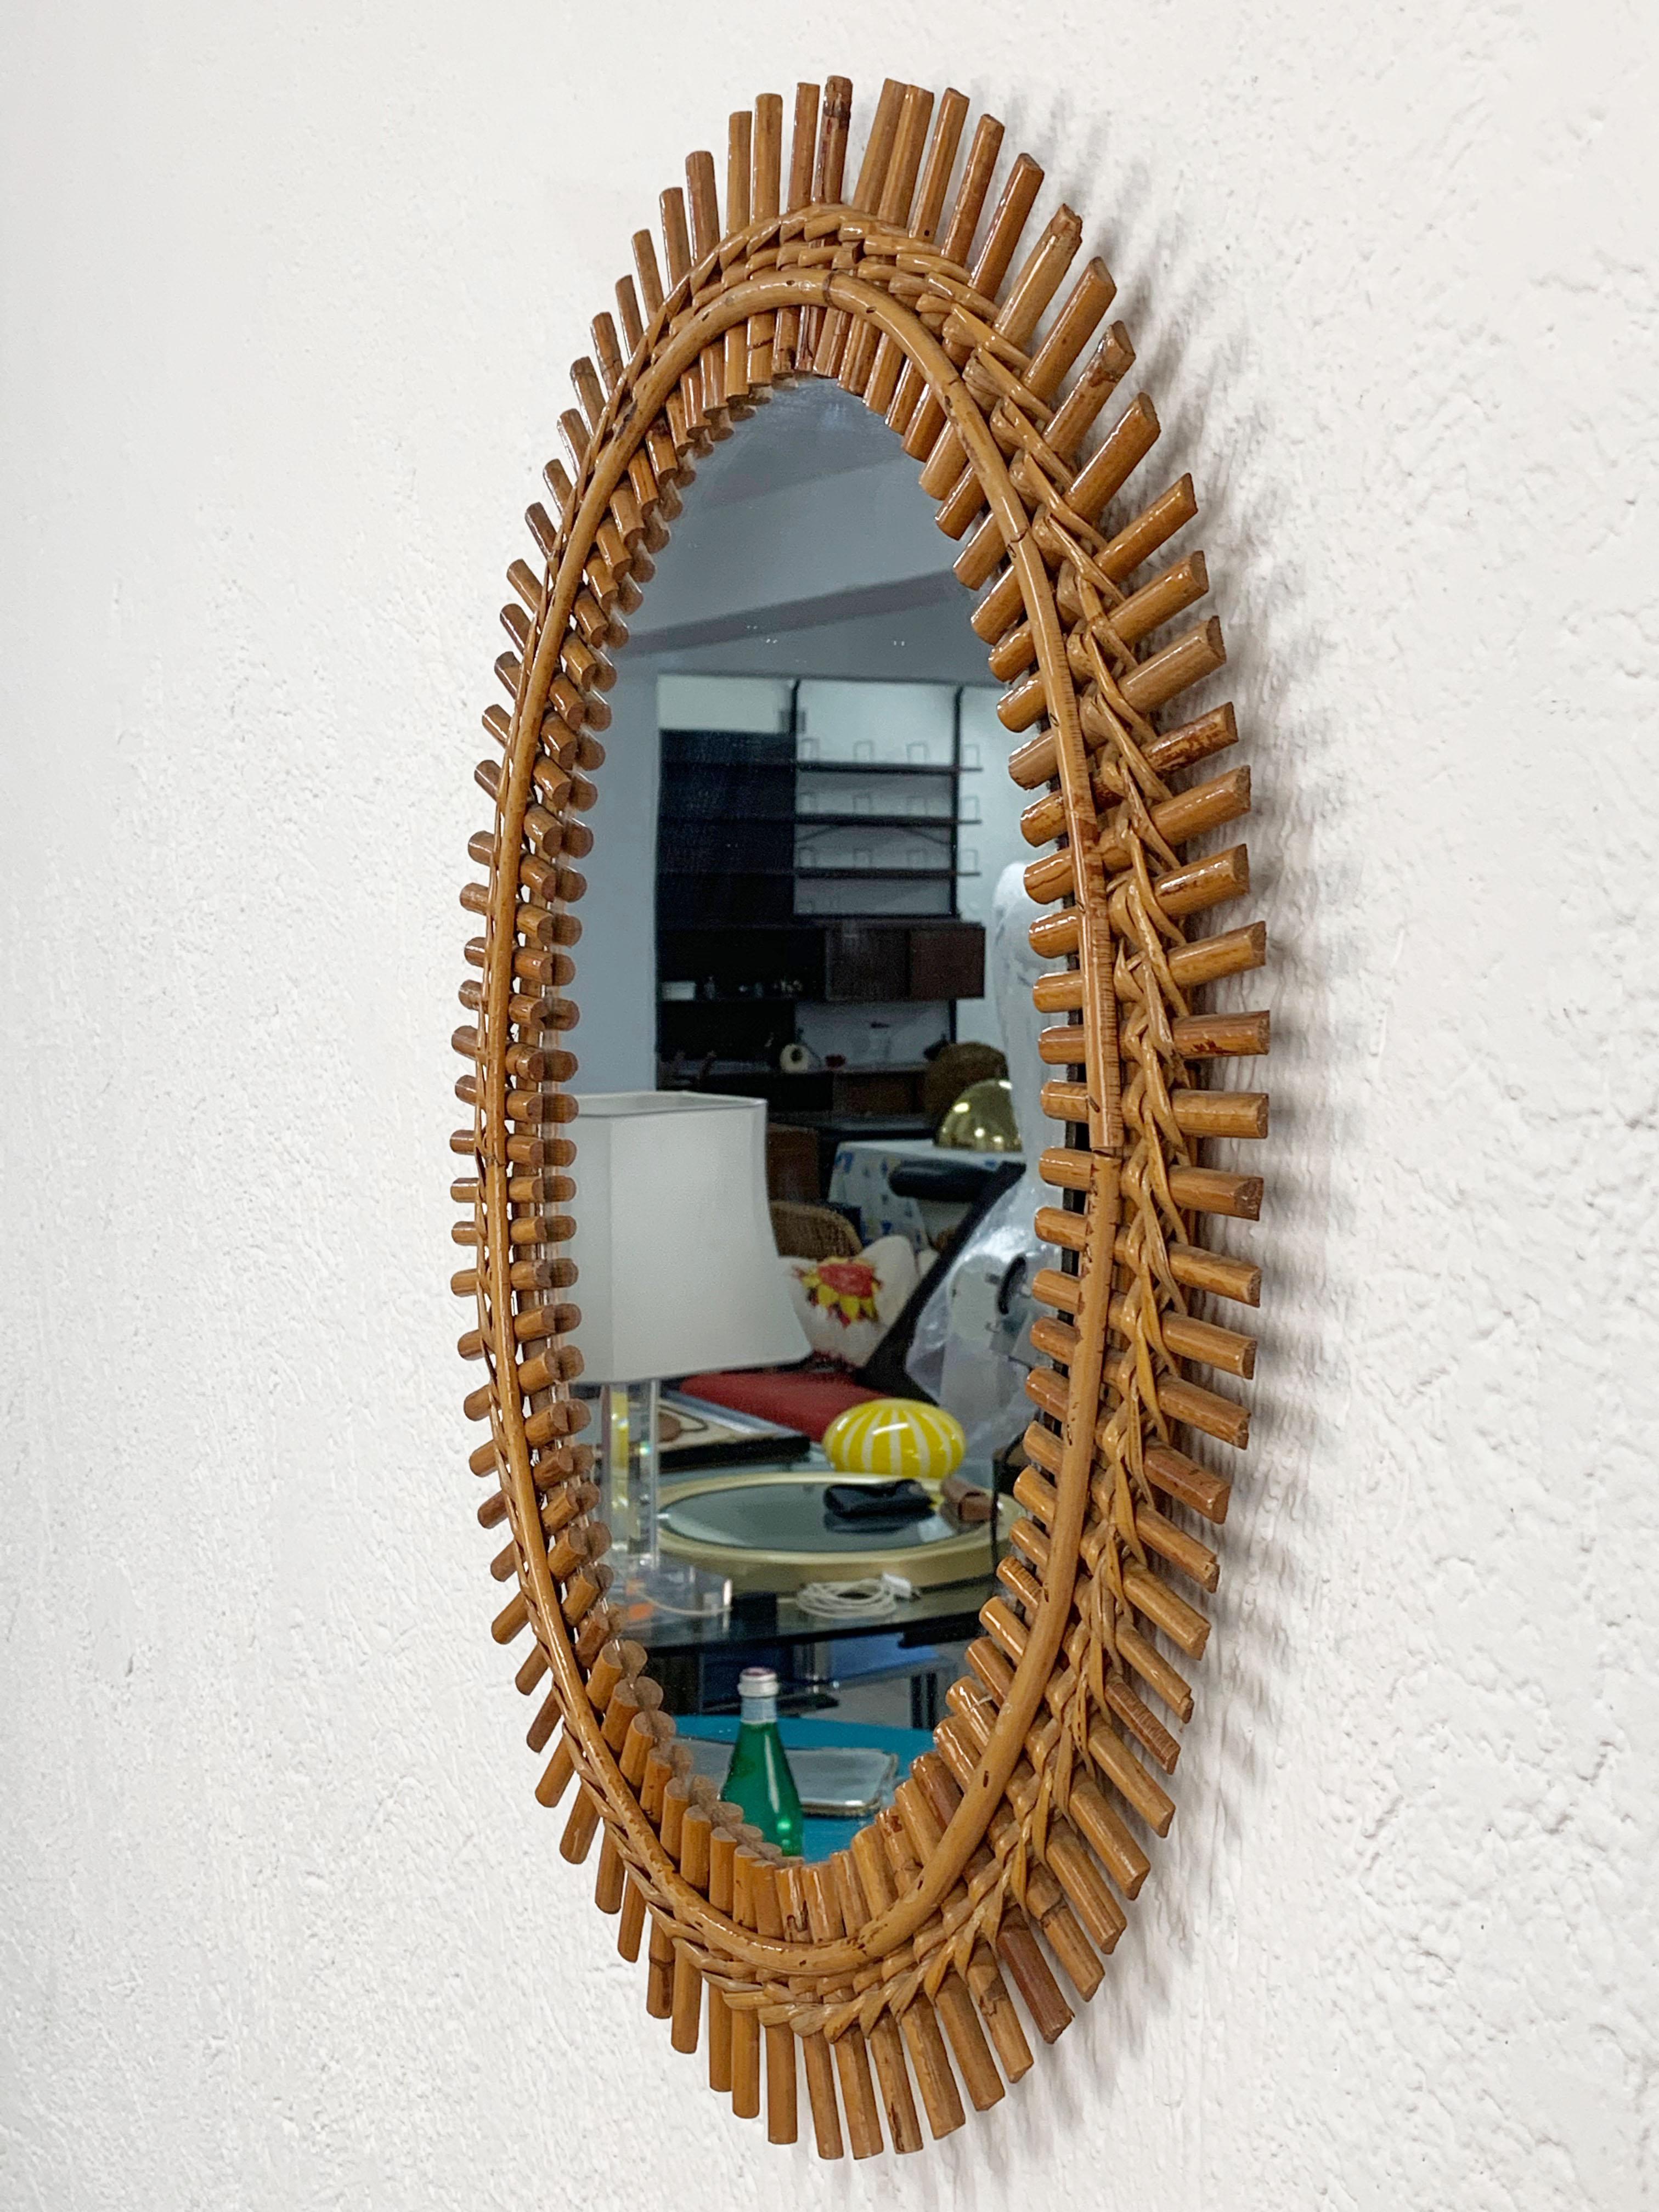 French Riviera Oval Wall Mirror in Bamboo and Rattan, 1960s Midcentury 2